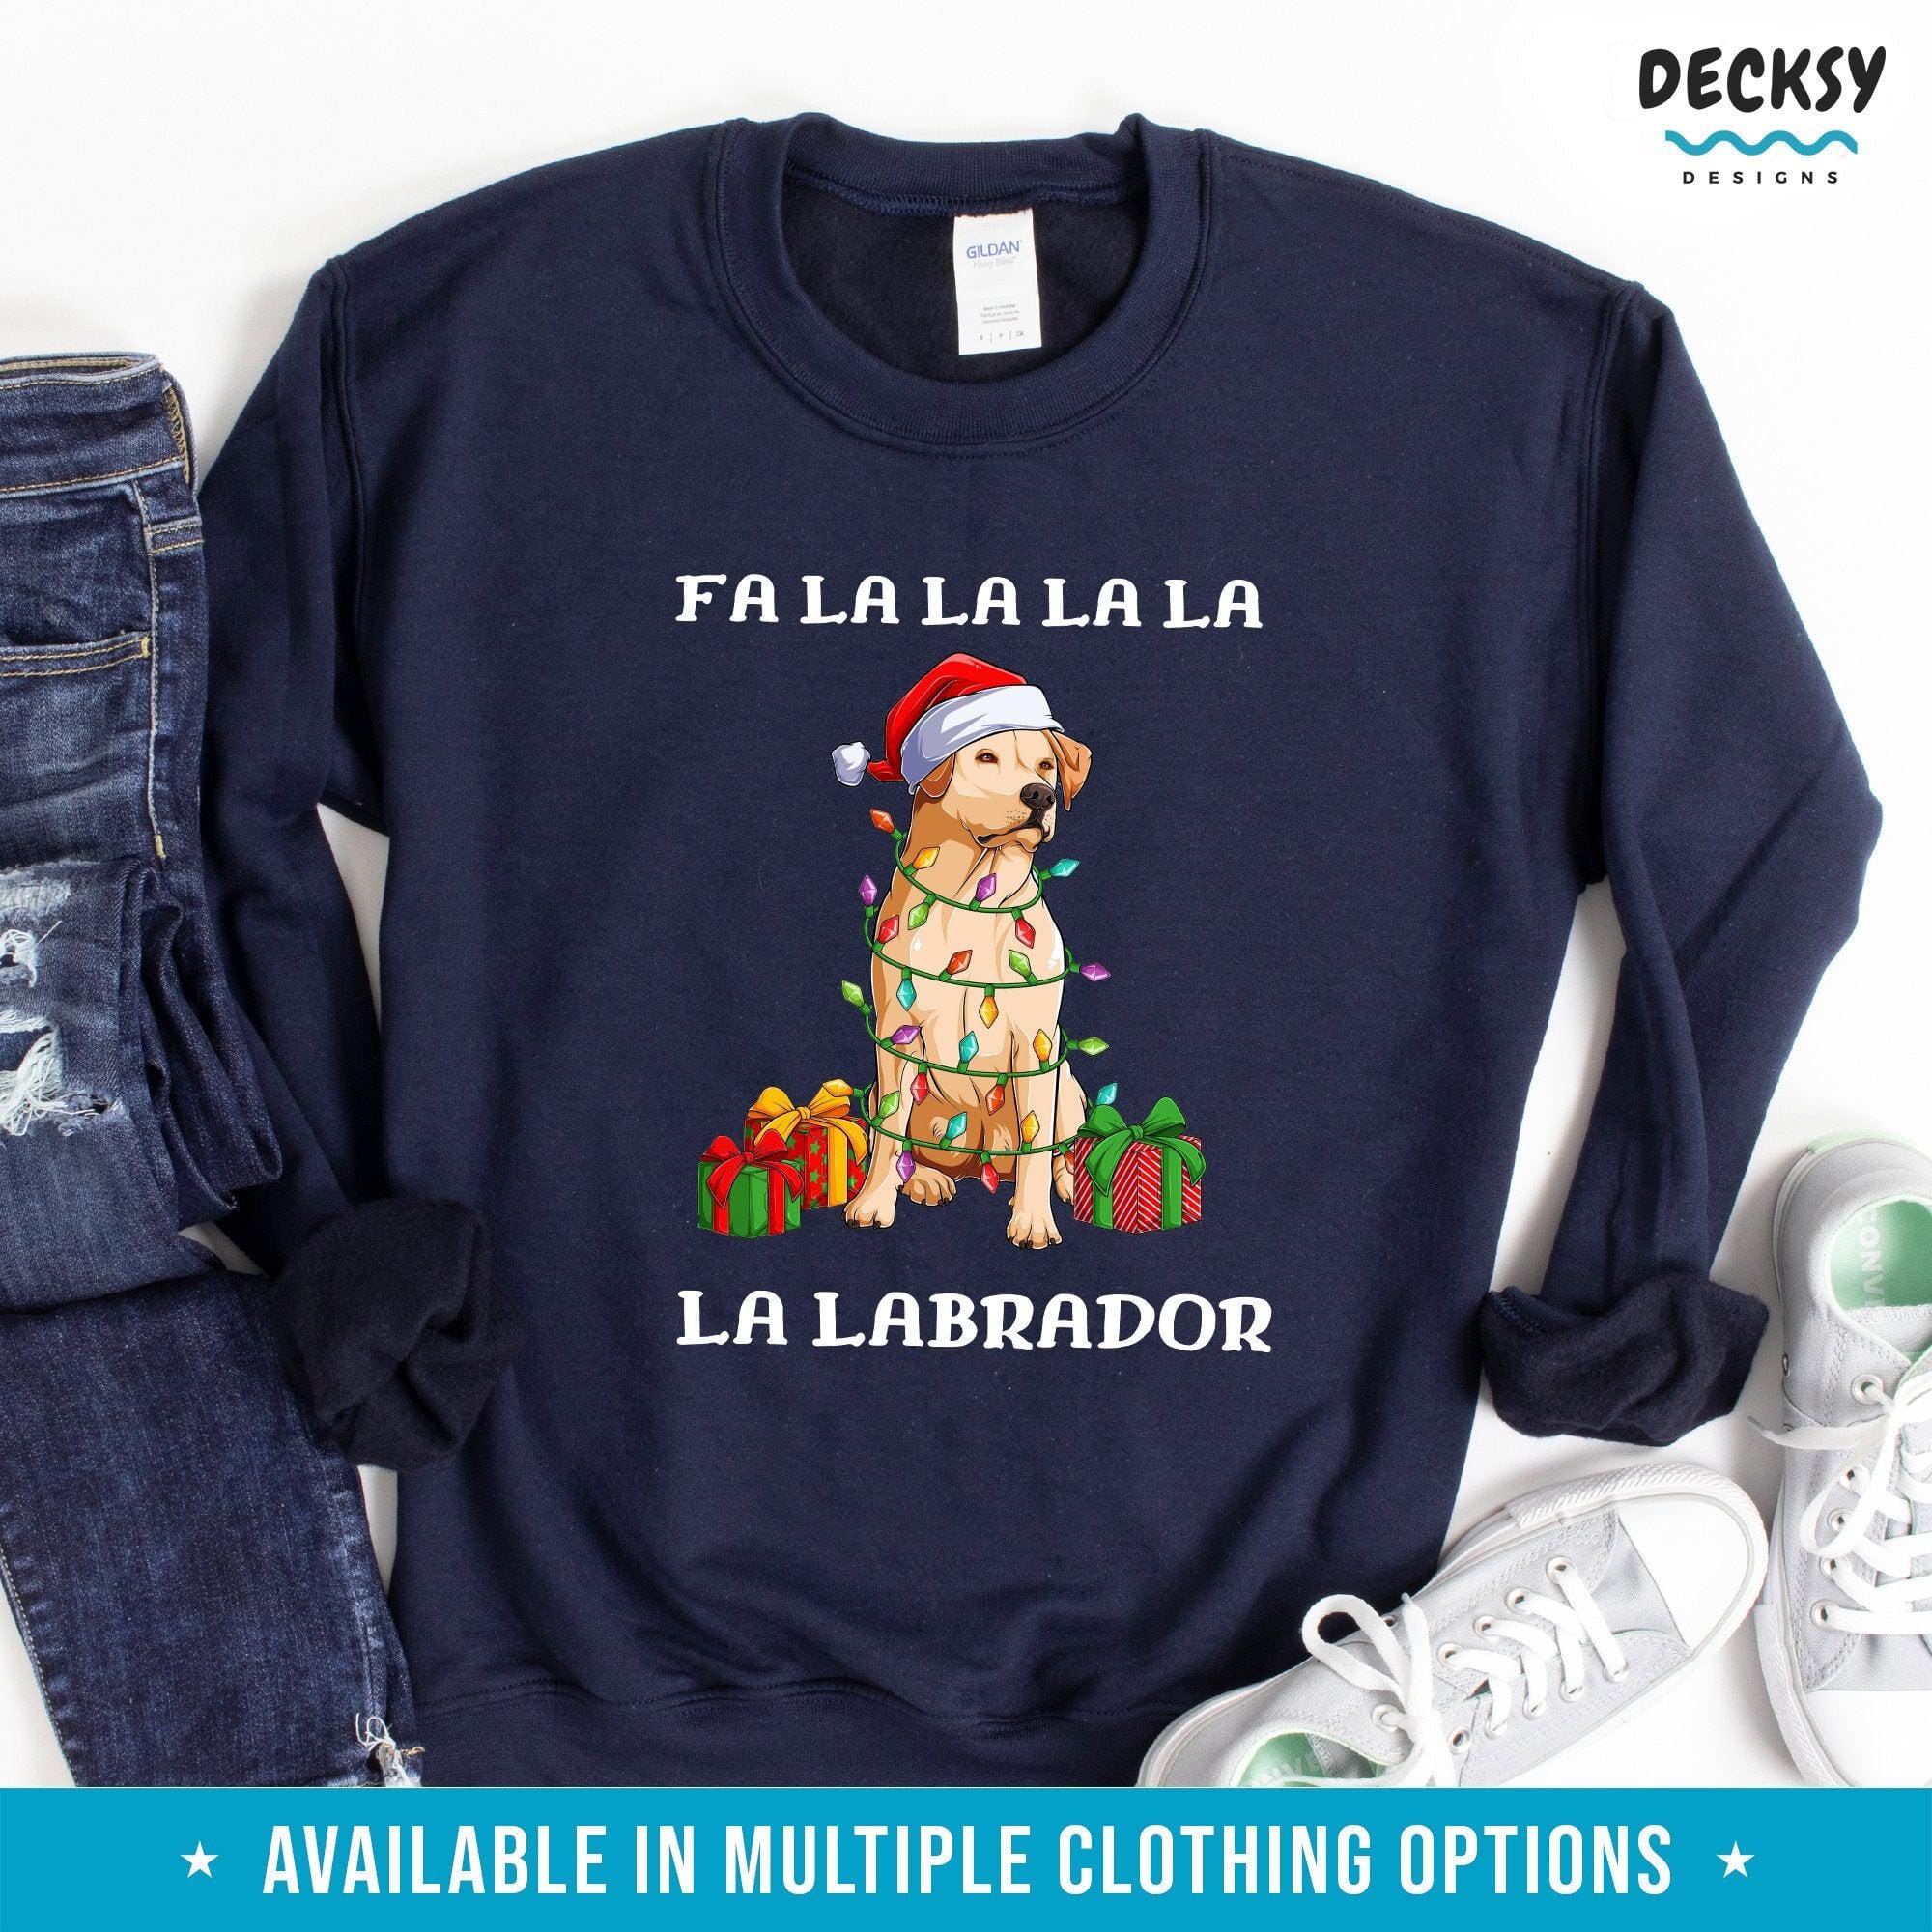 Labrador Christmas Shirt, Lab Owner Gift-Clothing:Gender-Neutral Adult Clothing:Tops & Tees:T-shirts:Graphic Tees-DecksyDesigns